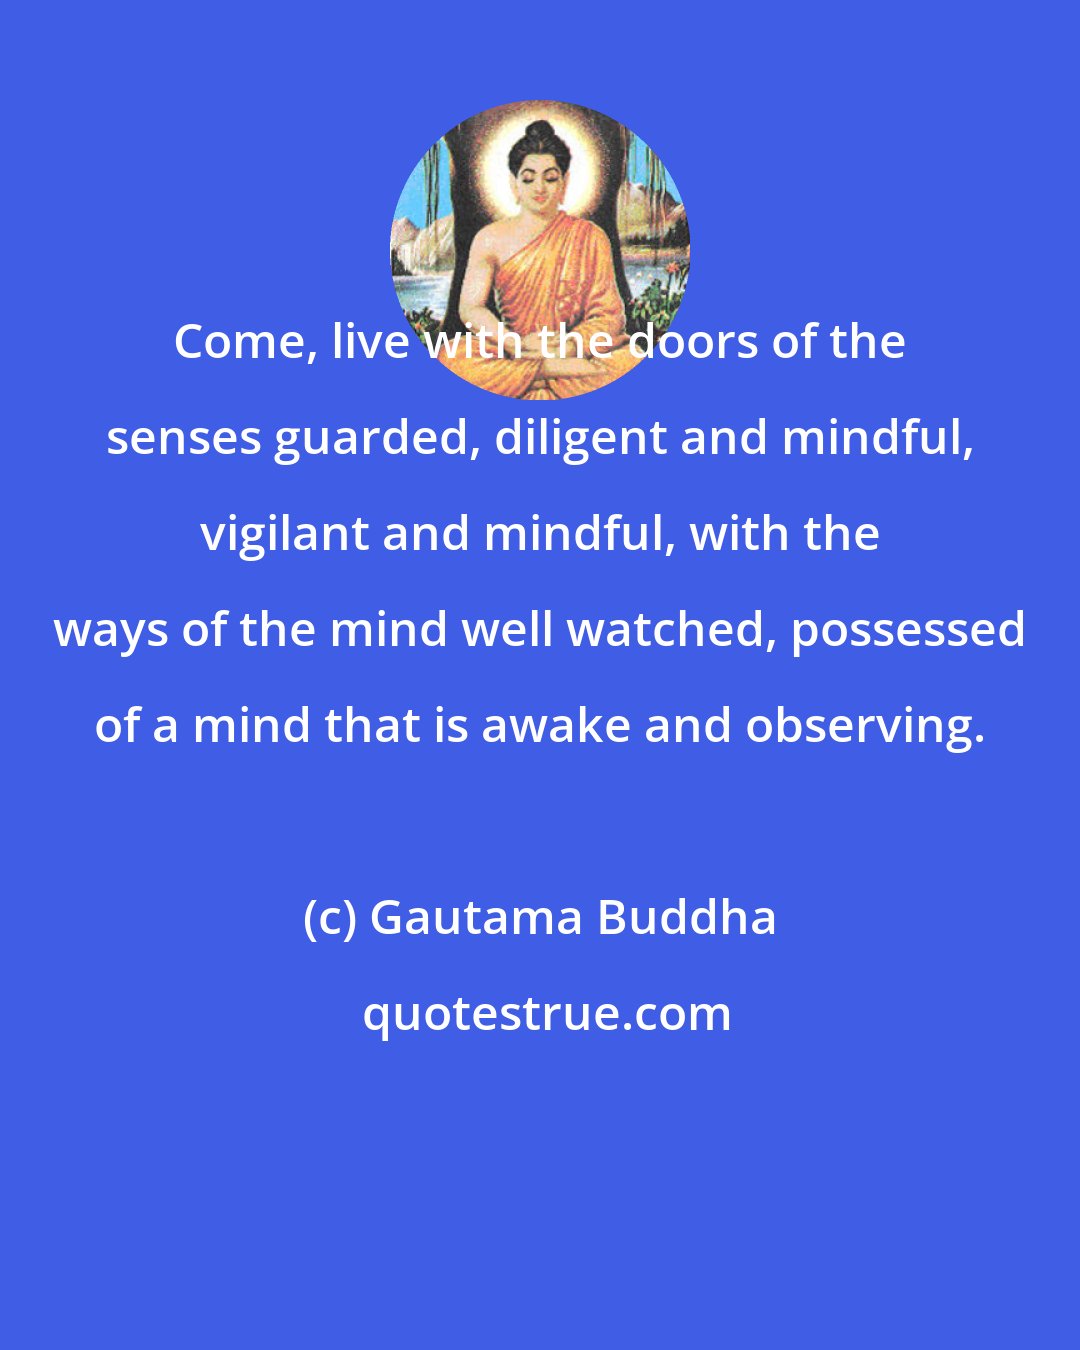 Gautama Buddha: Come, live with the doors of the senses guarded, diligent and mindful, vigilant and mindful, with the ways of the mind well watched, possessed of a mind that is awake and observing.